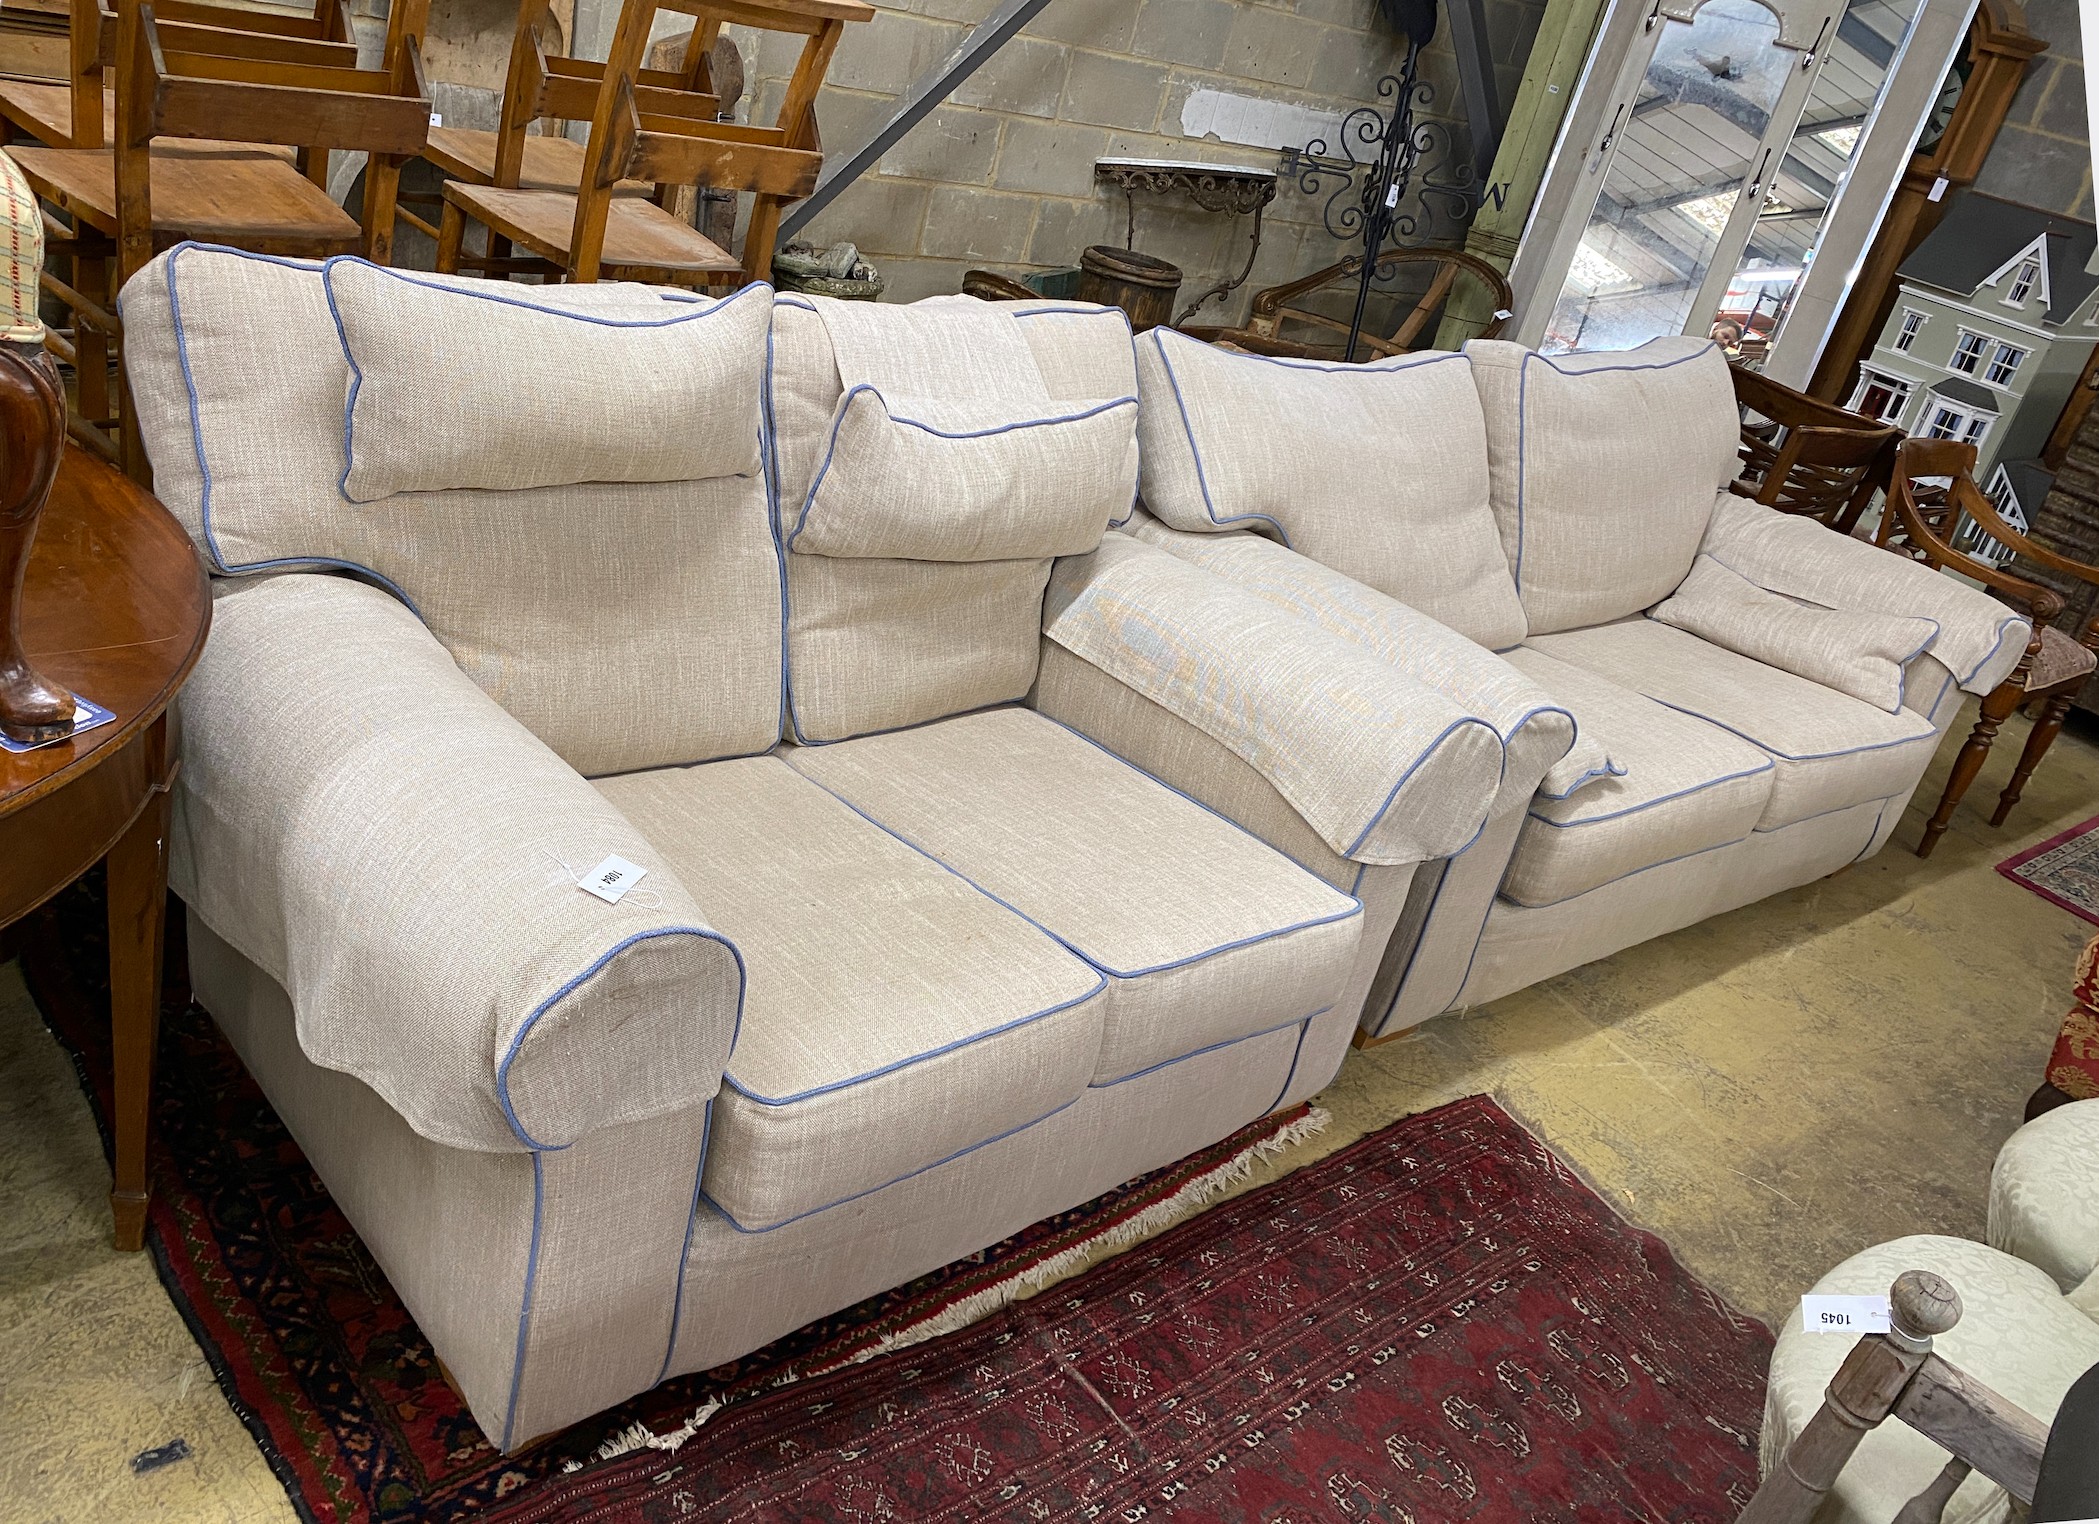 Two cream upholstered settees, with blue corded edging, larger length 200cm, depth 100cm, height 97cm